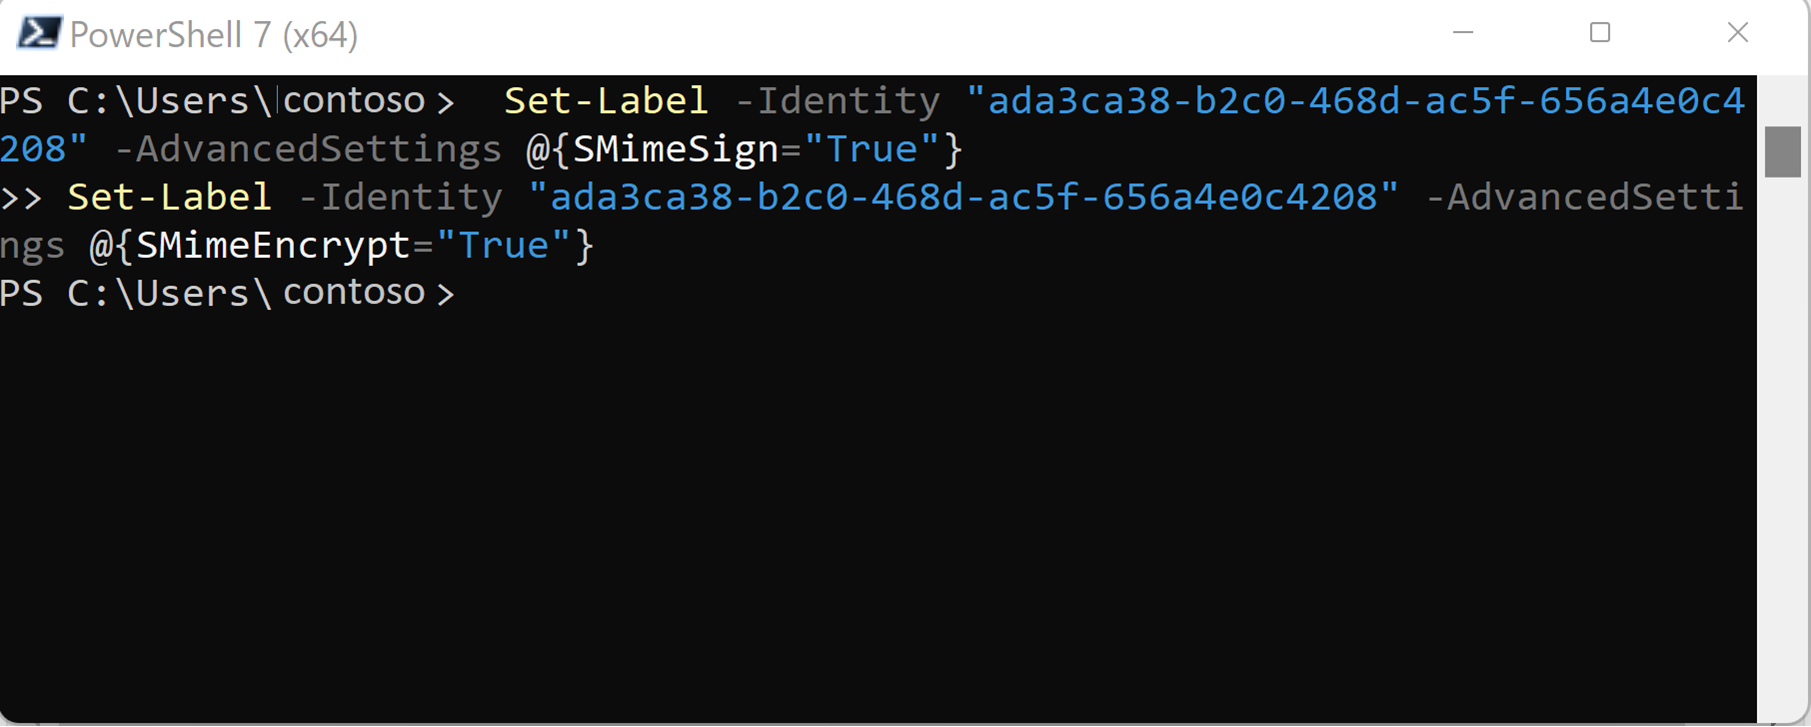 Assigning S/MIME encrypt and sign to an existing label